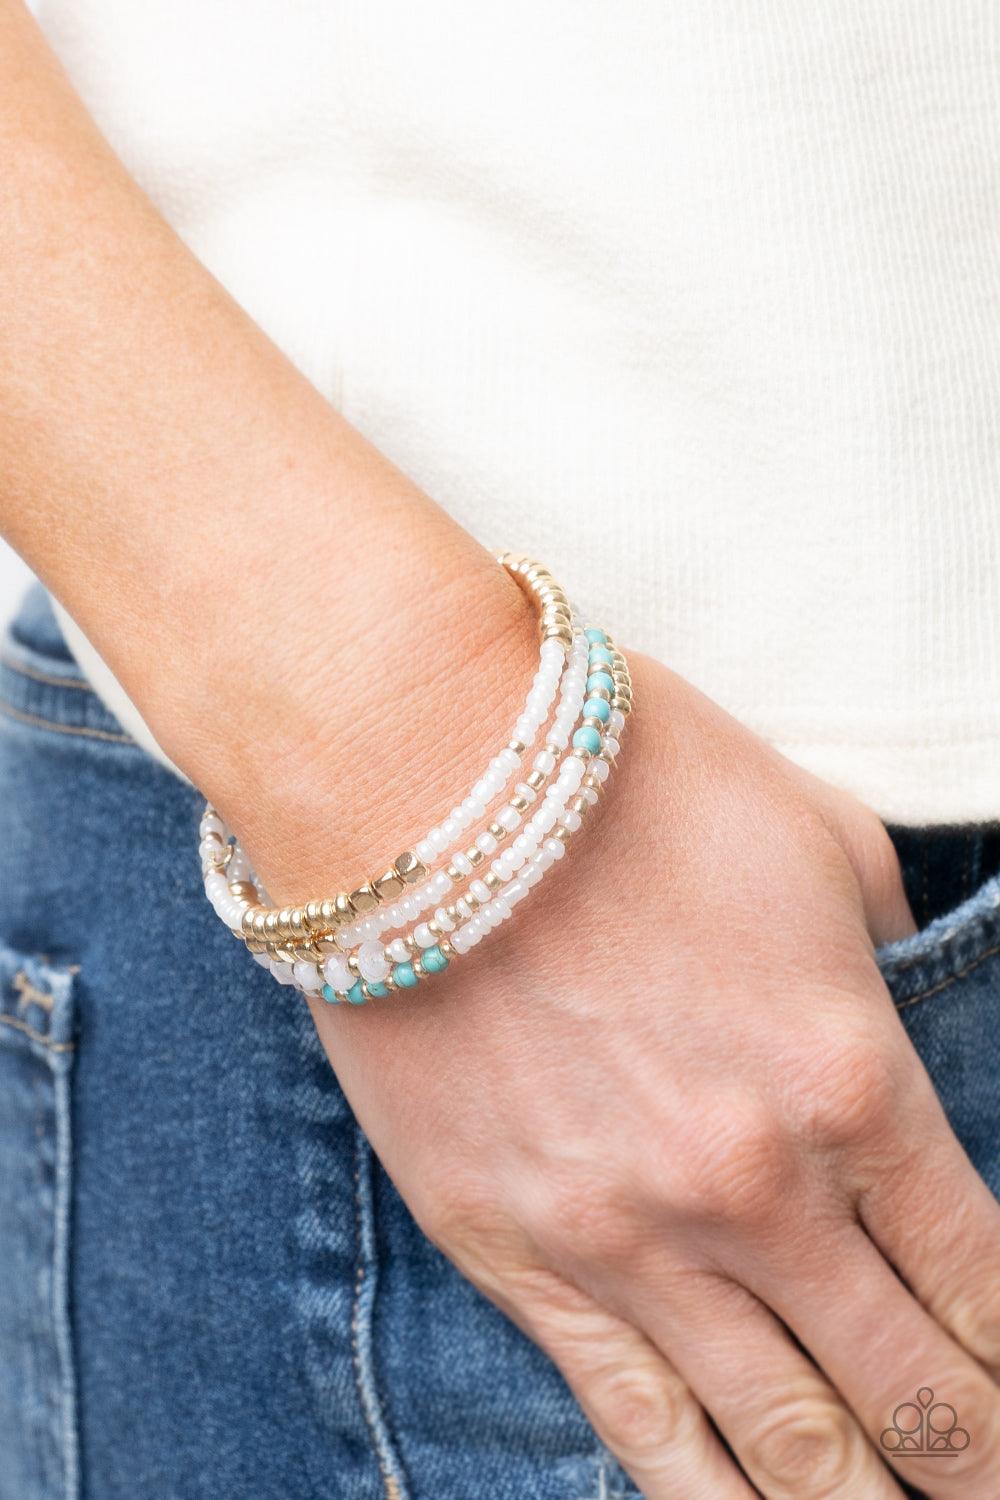 Paparazzi Accessories Infinitely Dreamy - Gold Sections of pearly white seed beads alternate with gold, turquoise, and crystal-like beads in infinite rows. The dreamy colors are threaded along a continuous strand of wire for an infinity wrap-style bracele